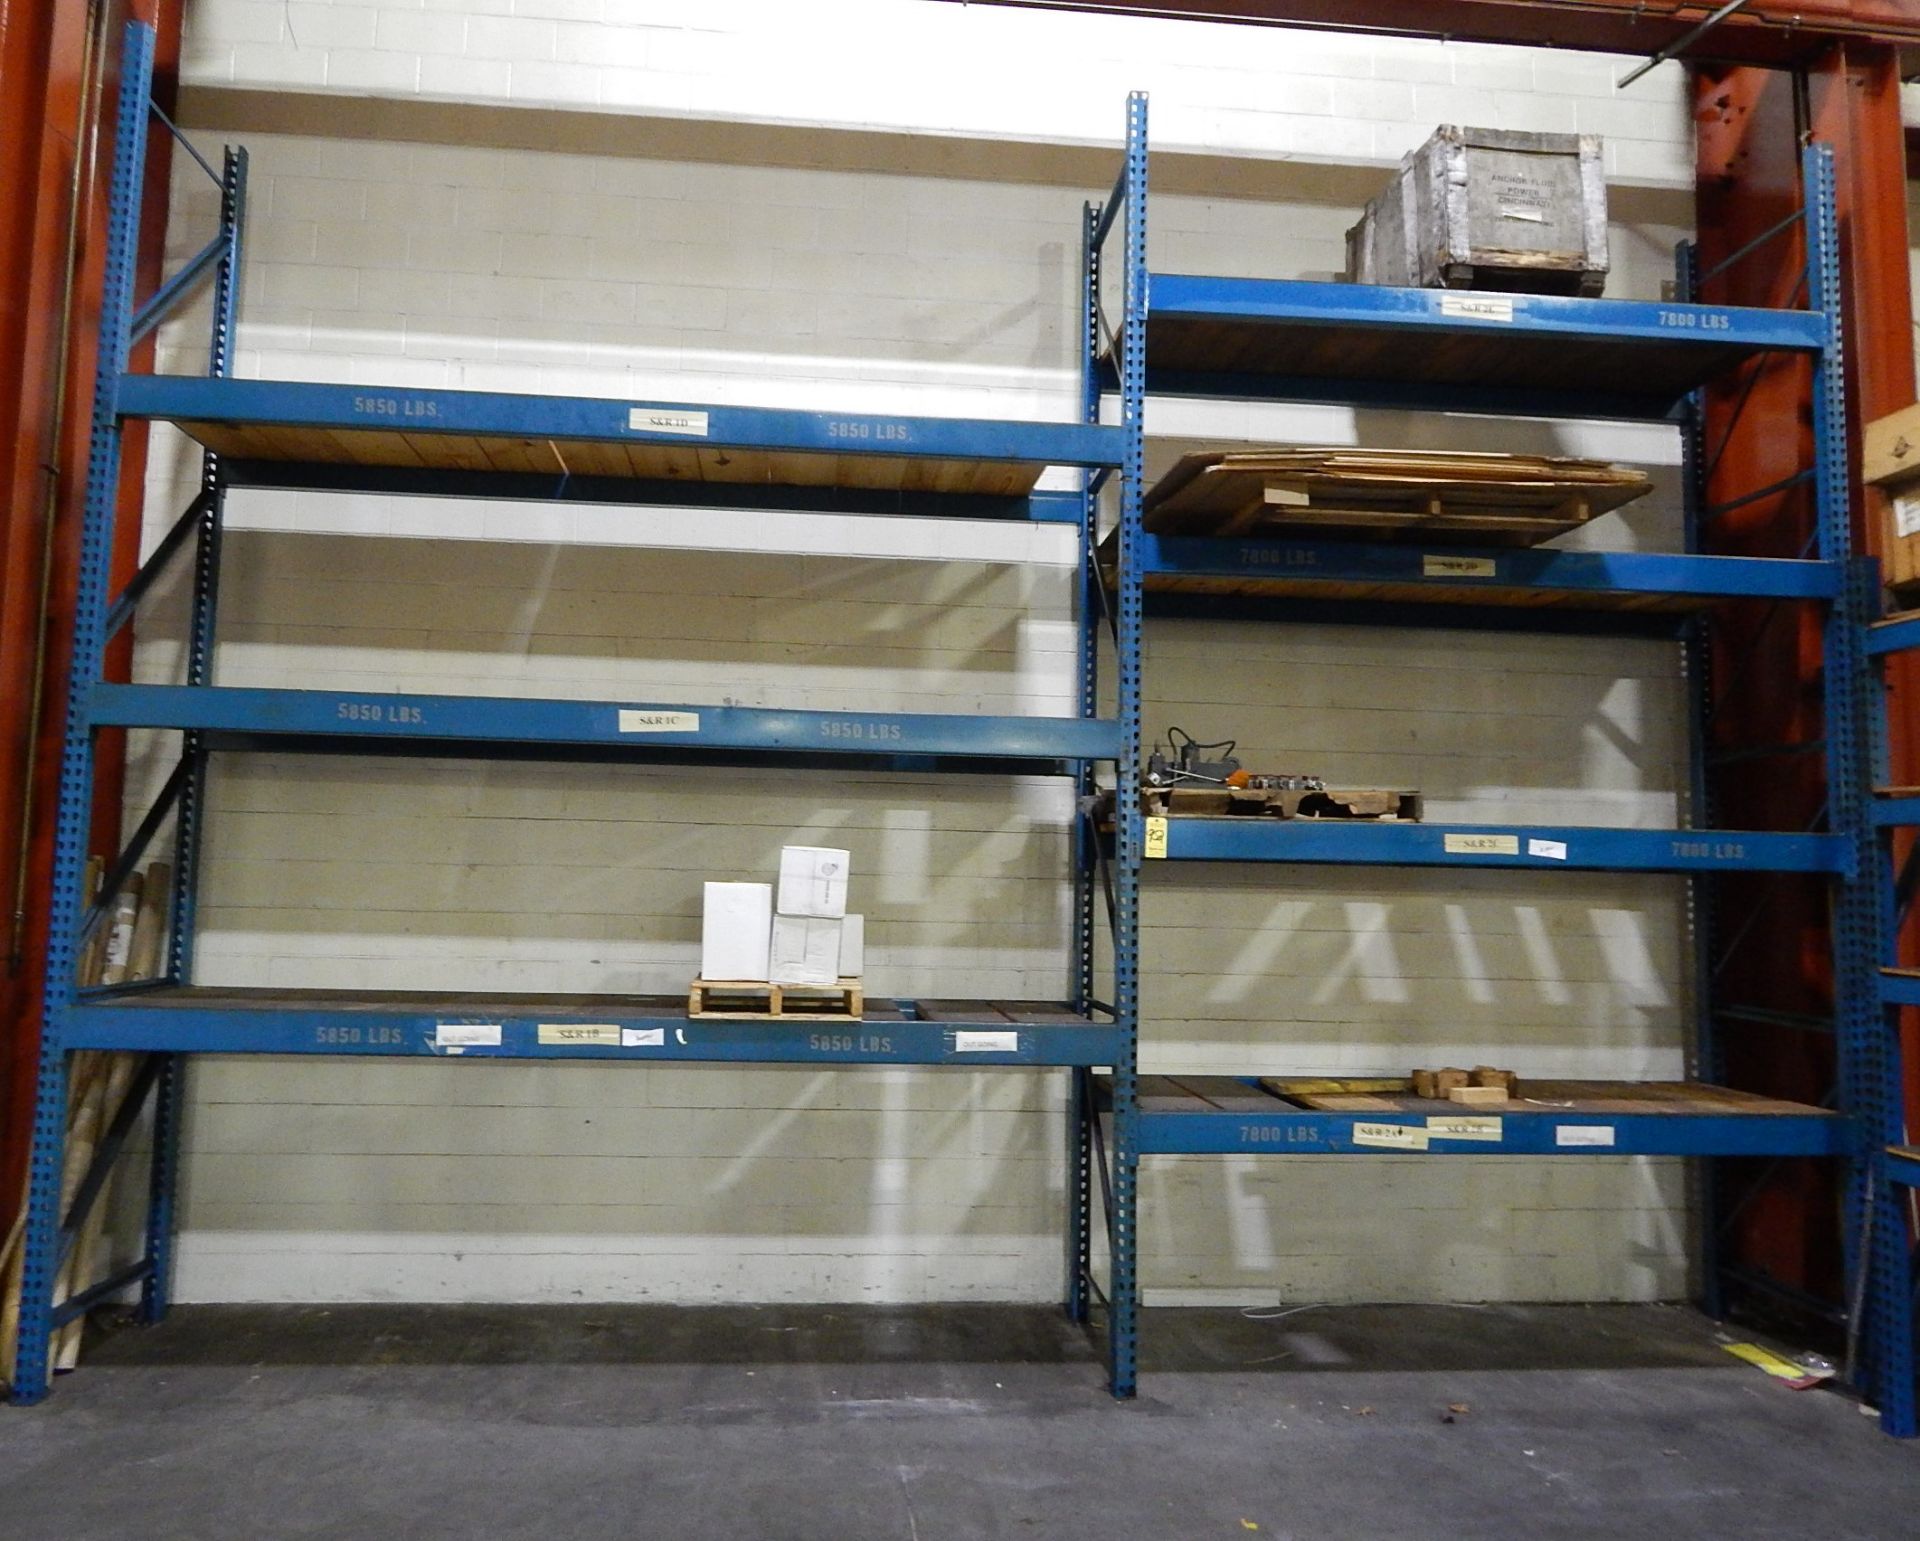 Pallet Racking, (2) Sections, 3 Uprights, 14 Cross Beams, 16' Height, 36" Deep, 9' Wide, 6" Beams